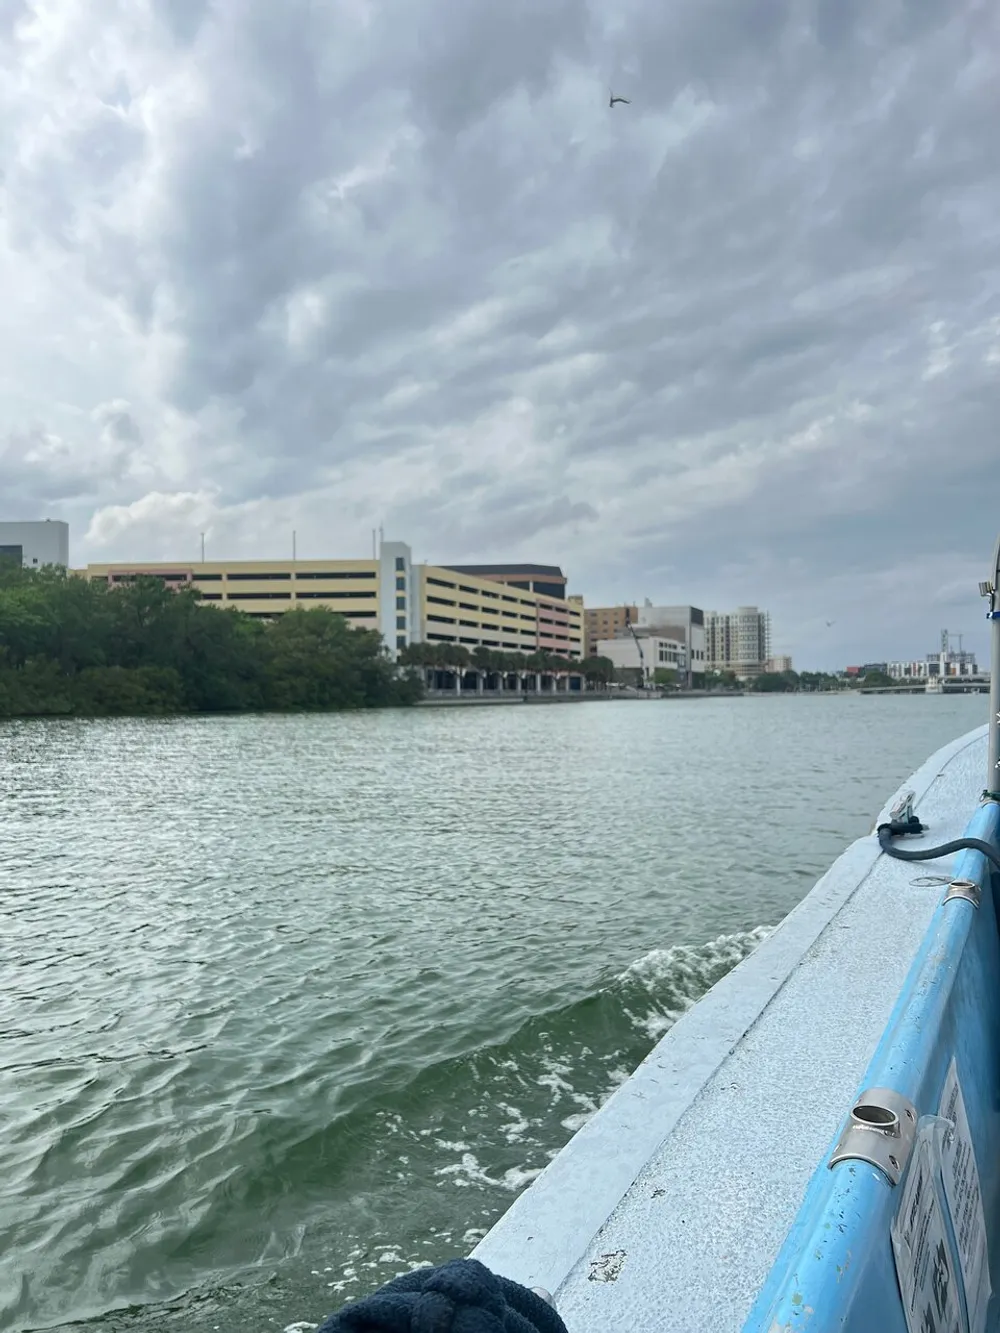 The image features a view from a boat showing choppy water in the foreground and a city skyline under a cloudy sky in the background